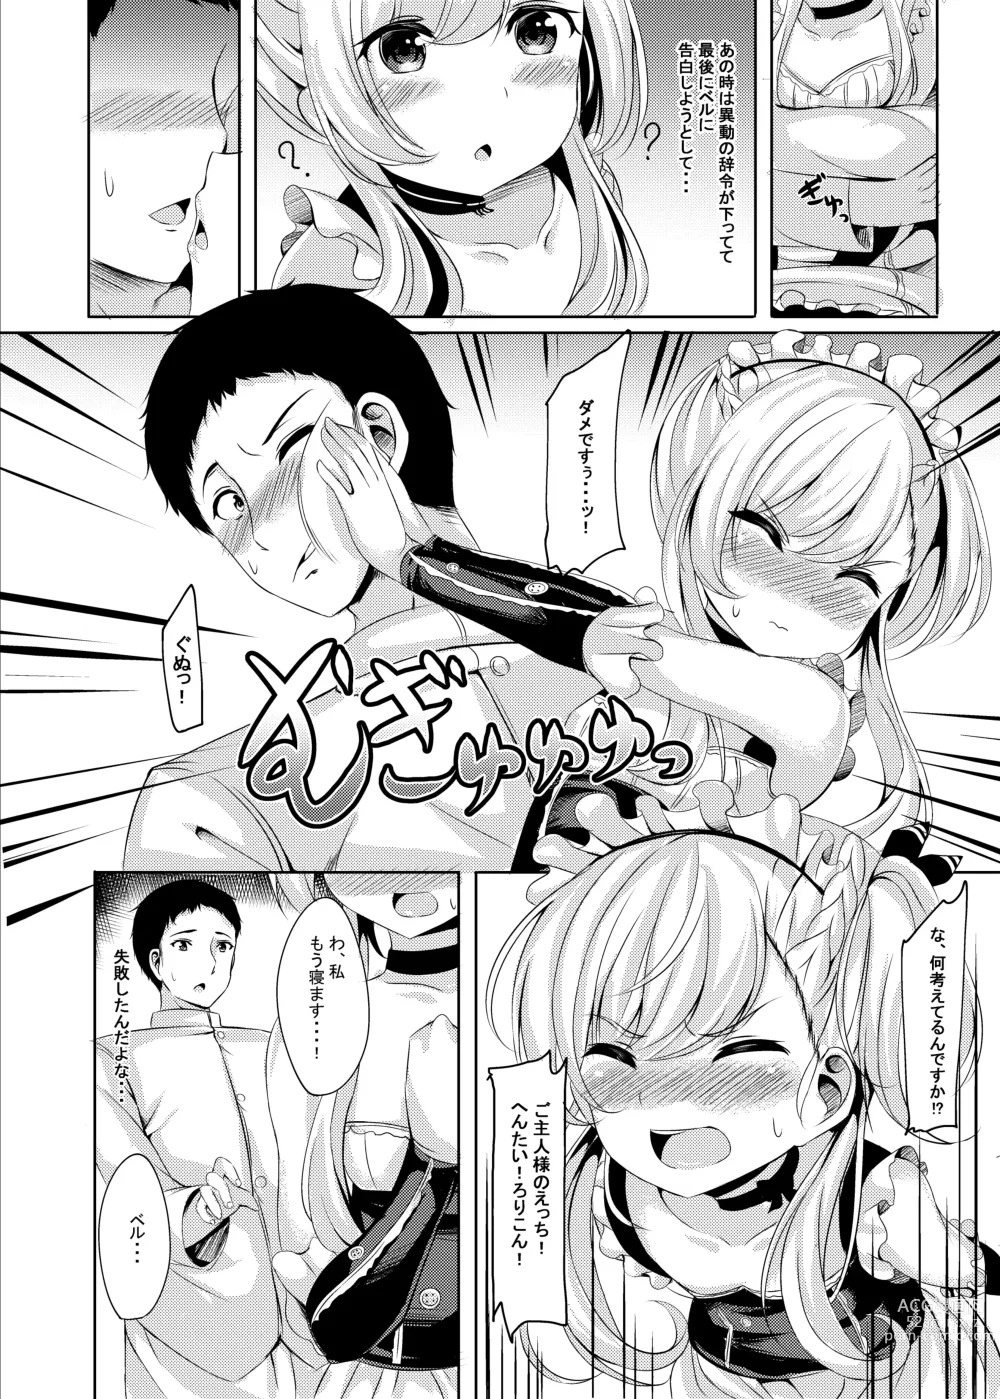 Page 6 of doujinshi ring the bell